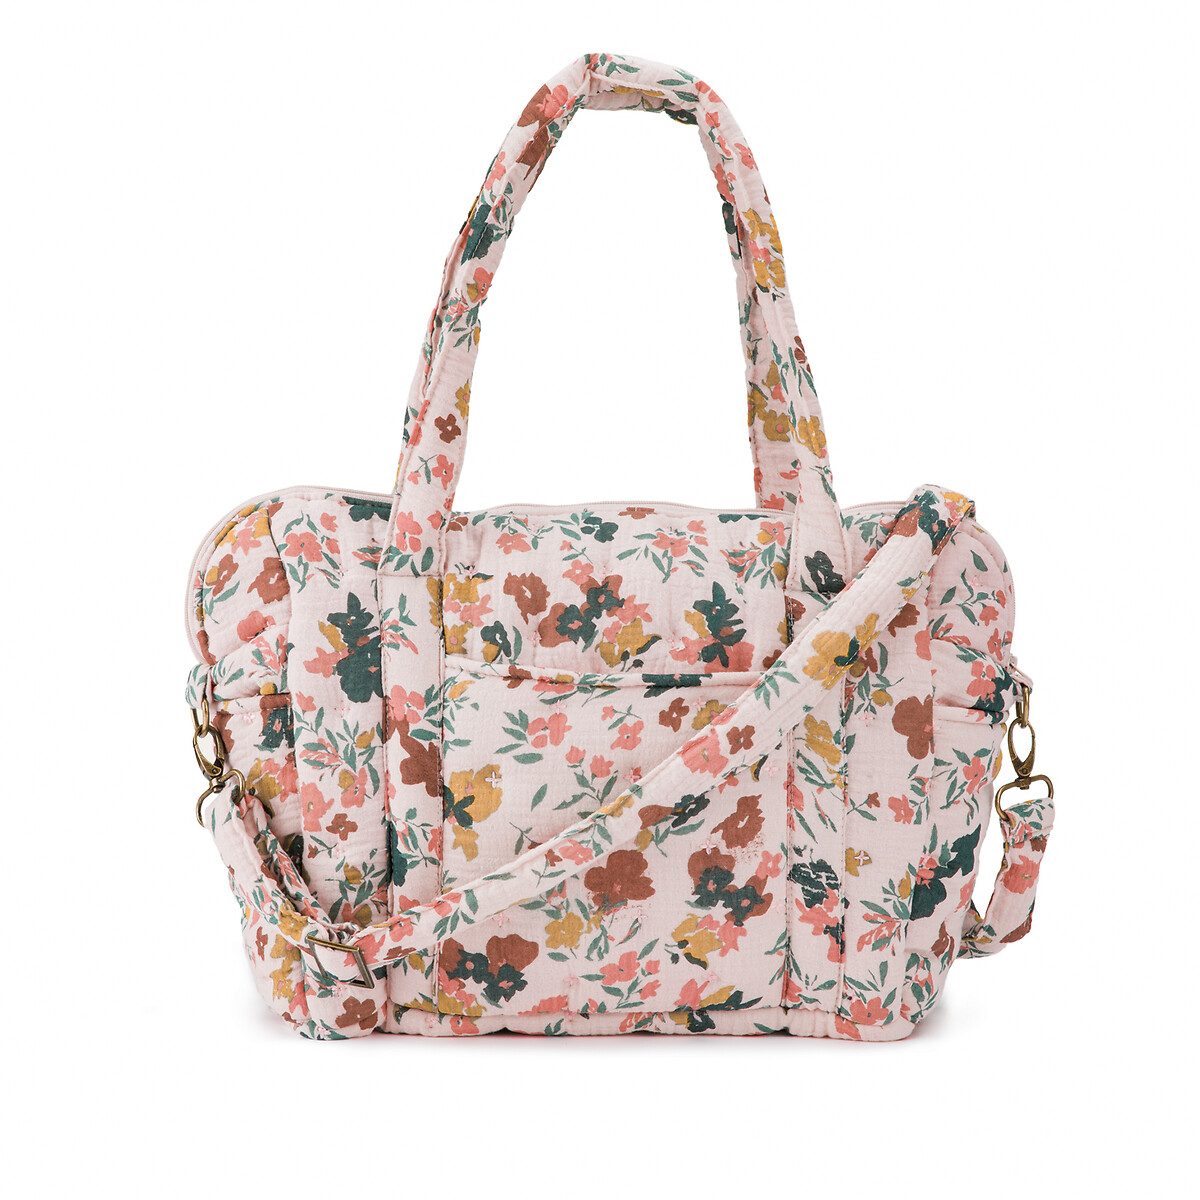 Callas Floral Cotton Muslin Changing Bag